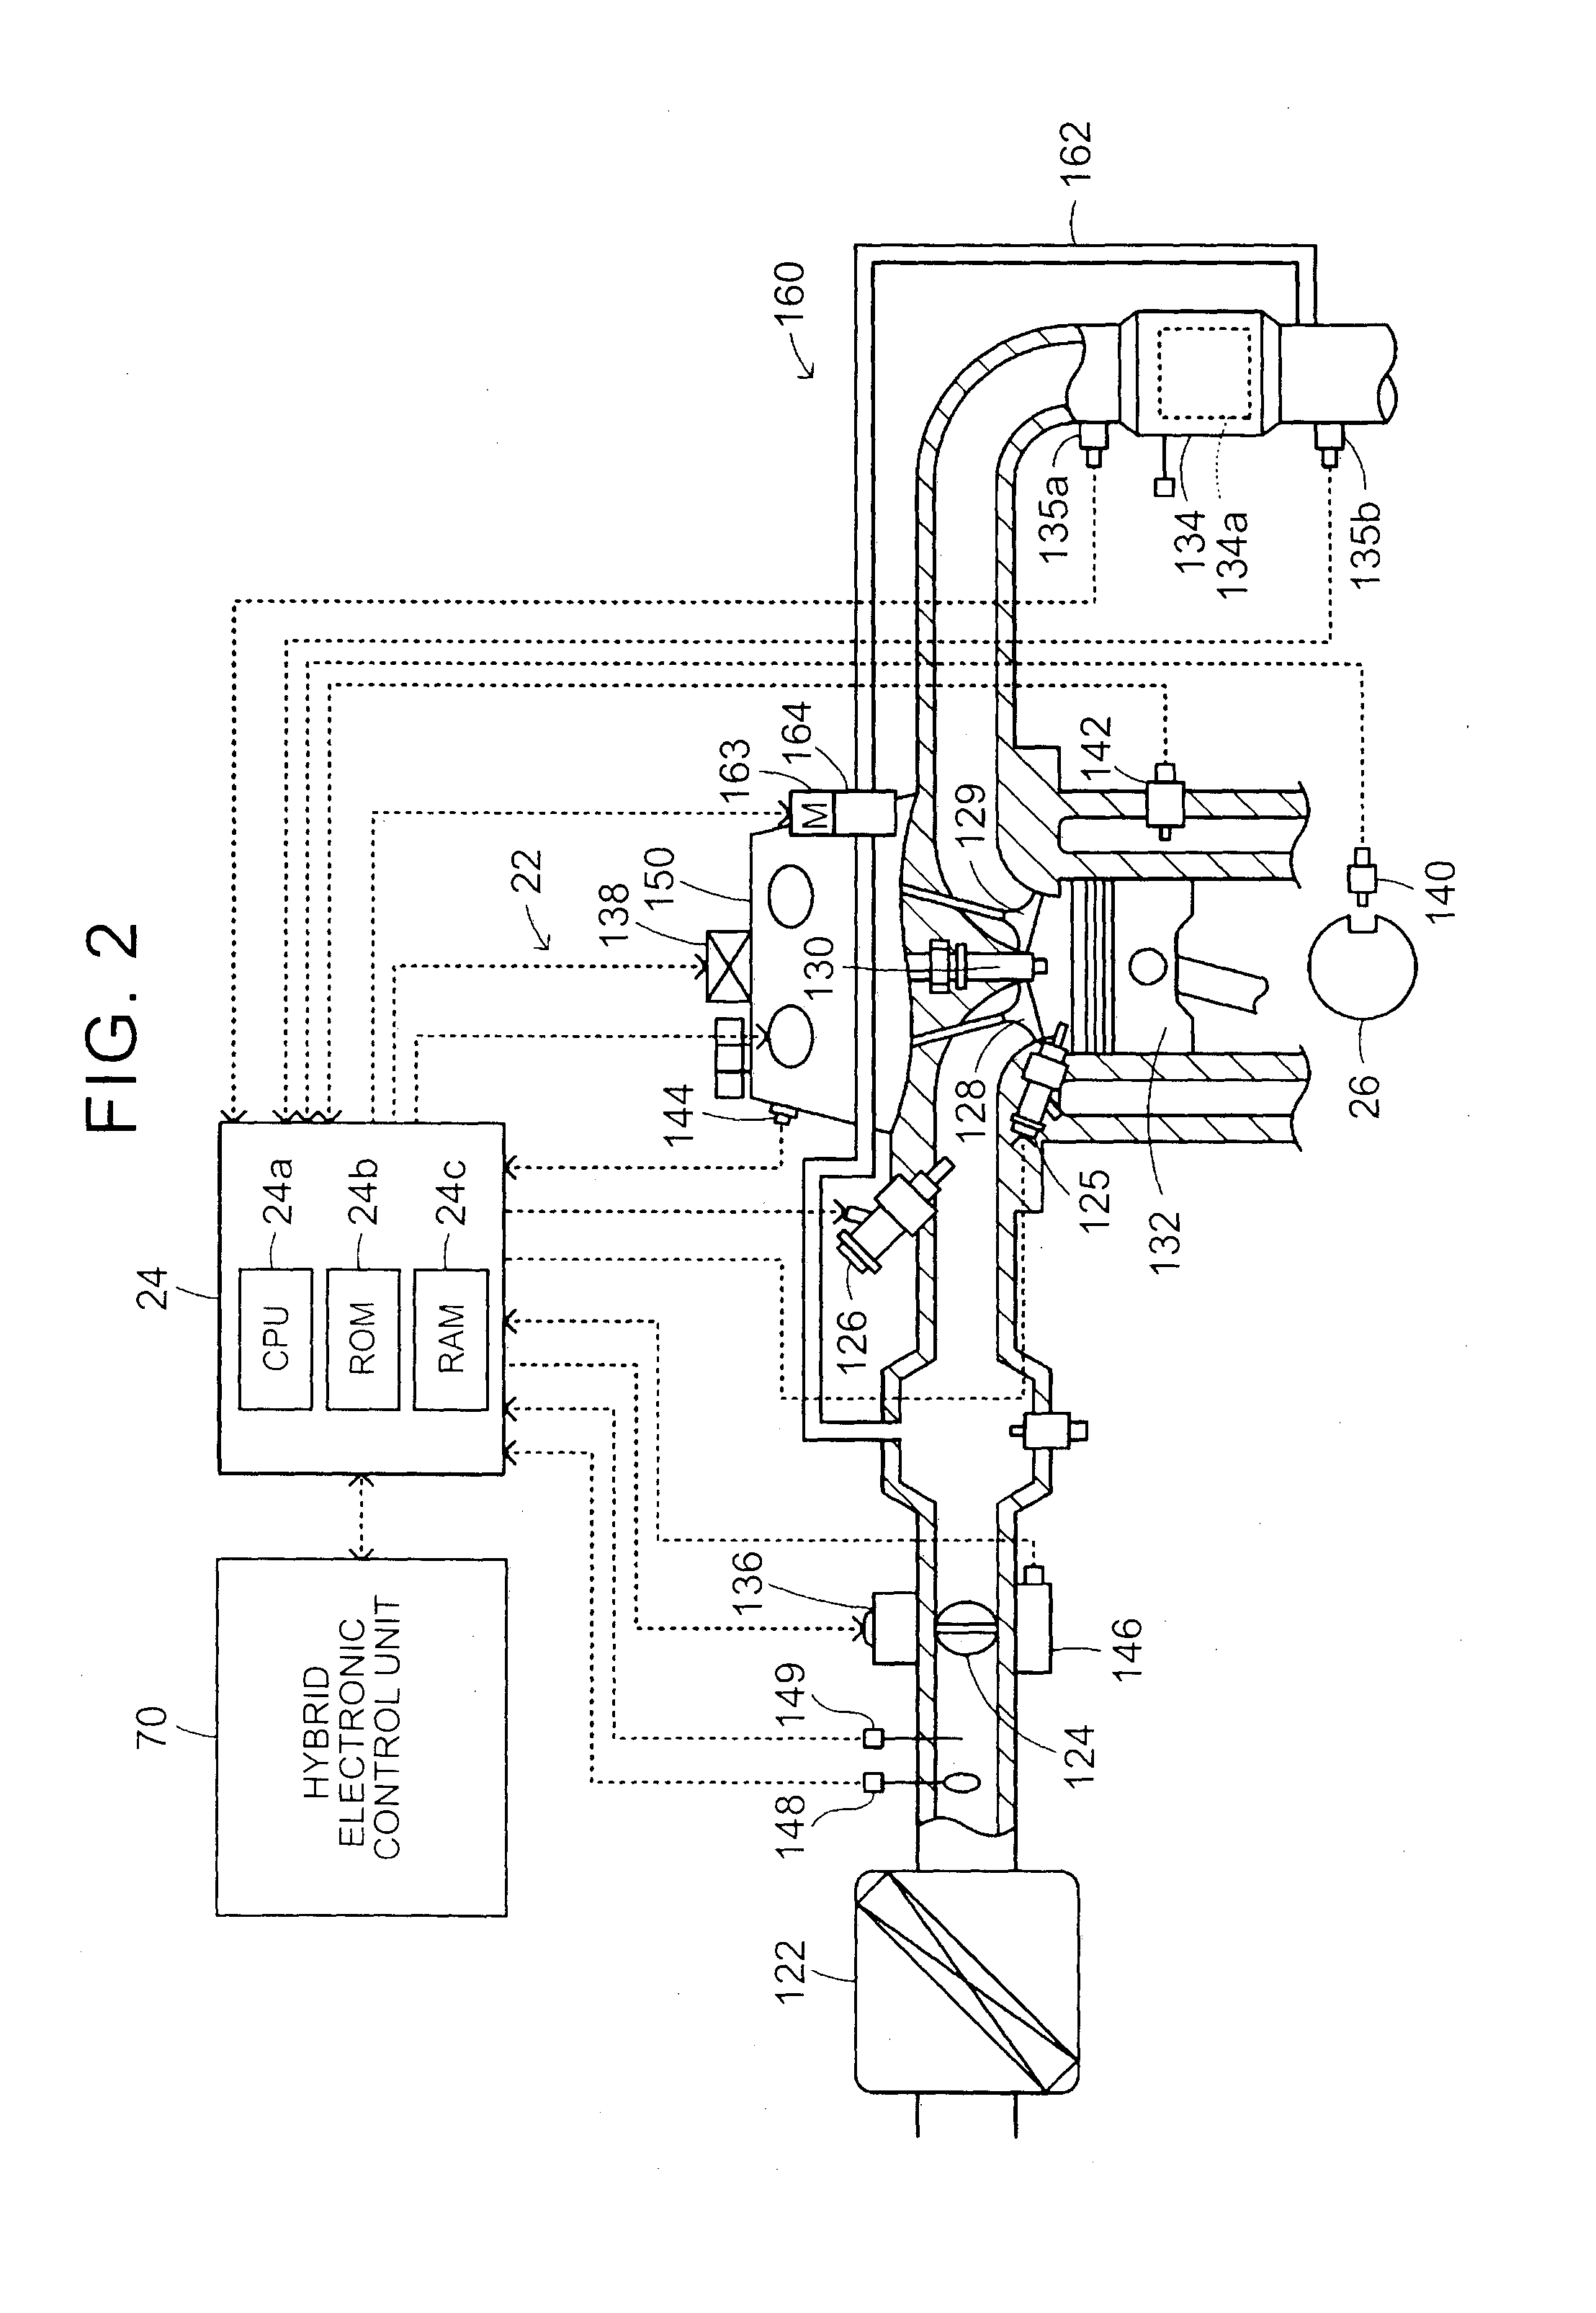 Internal combustion engine control for a hybrid vehicle